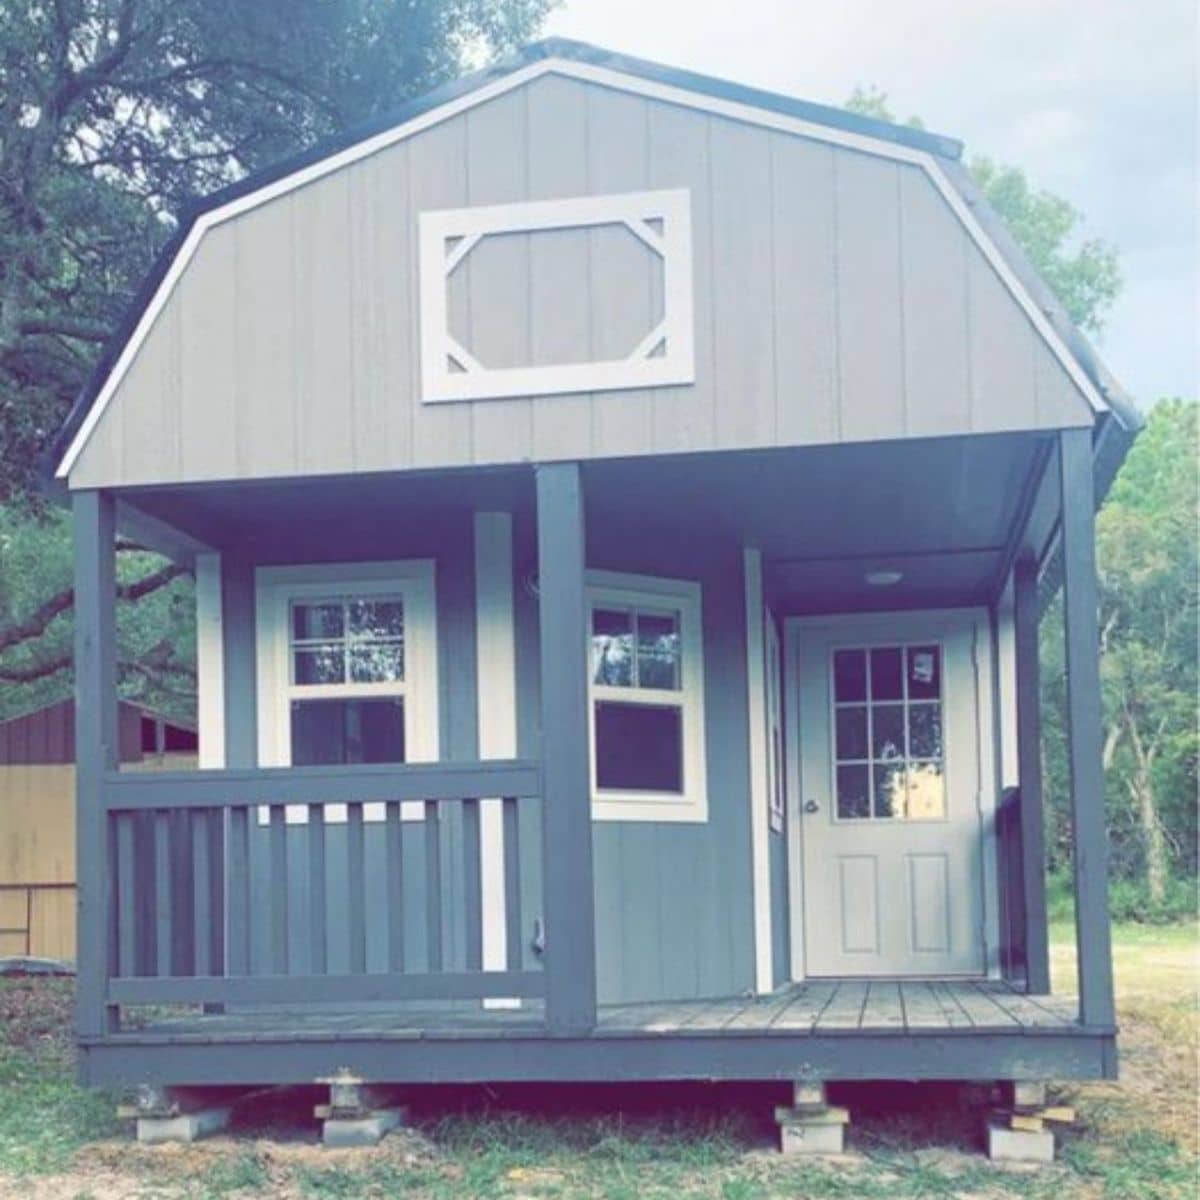 32' Spacious Tiny Barn Cabin is Super Affordable - Tiny Houses